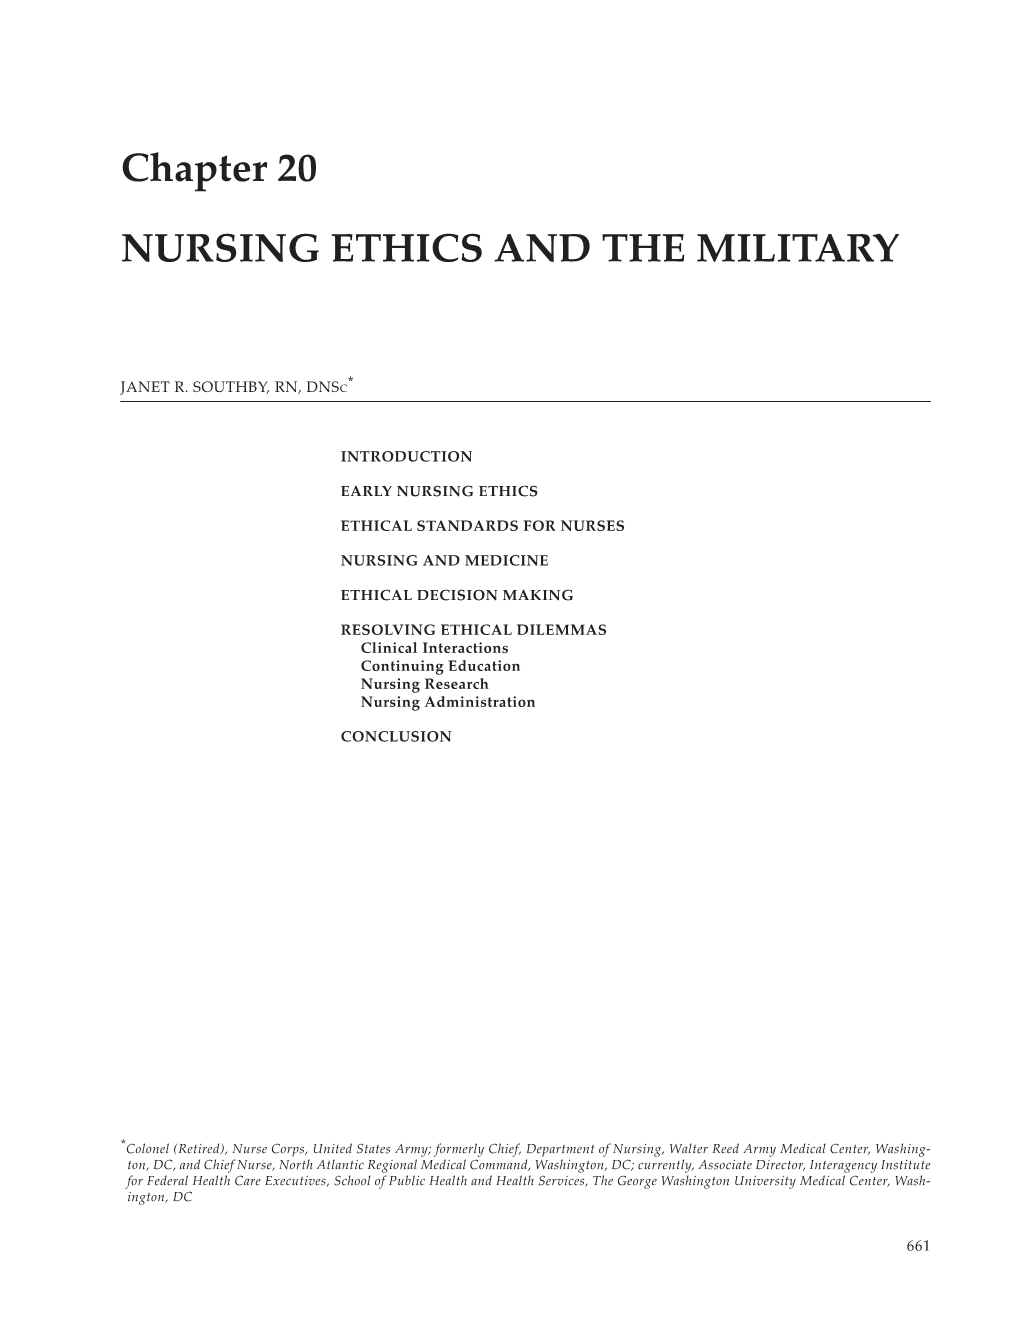 Military Medical Ethics, Volume 2, Chapter 20, Nursing Ethics and The